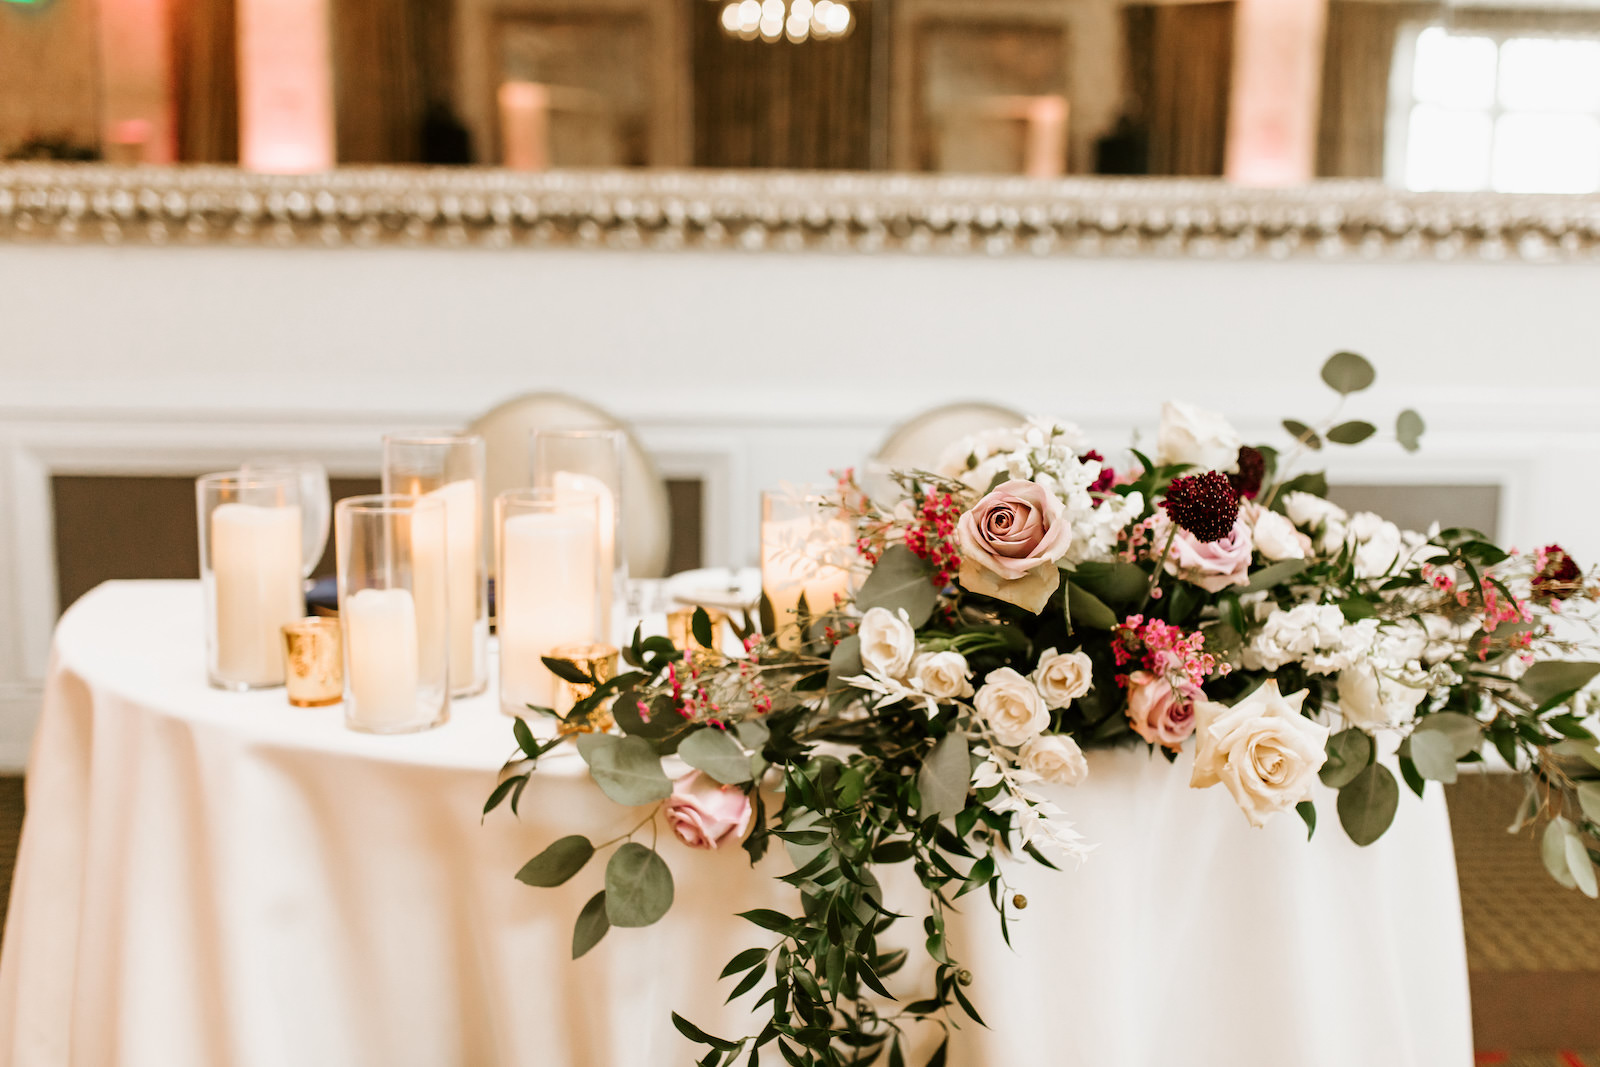 Wedding Sweetheart Table with Glass Cylinder Pillar Candles and Gold Mercury Glass Votives with Natural Loose Cascading Centerpiece of Eucalyptus Greenery and Pink and Cream Roses